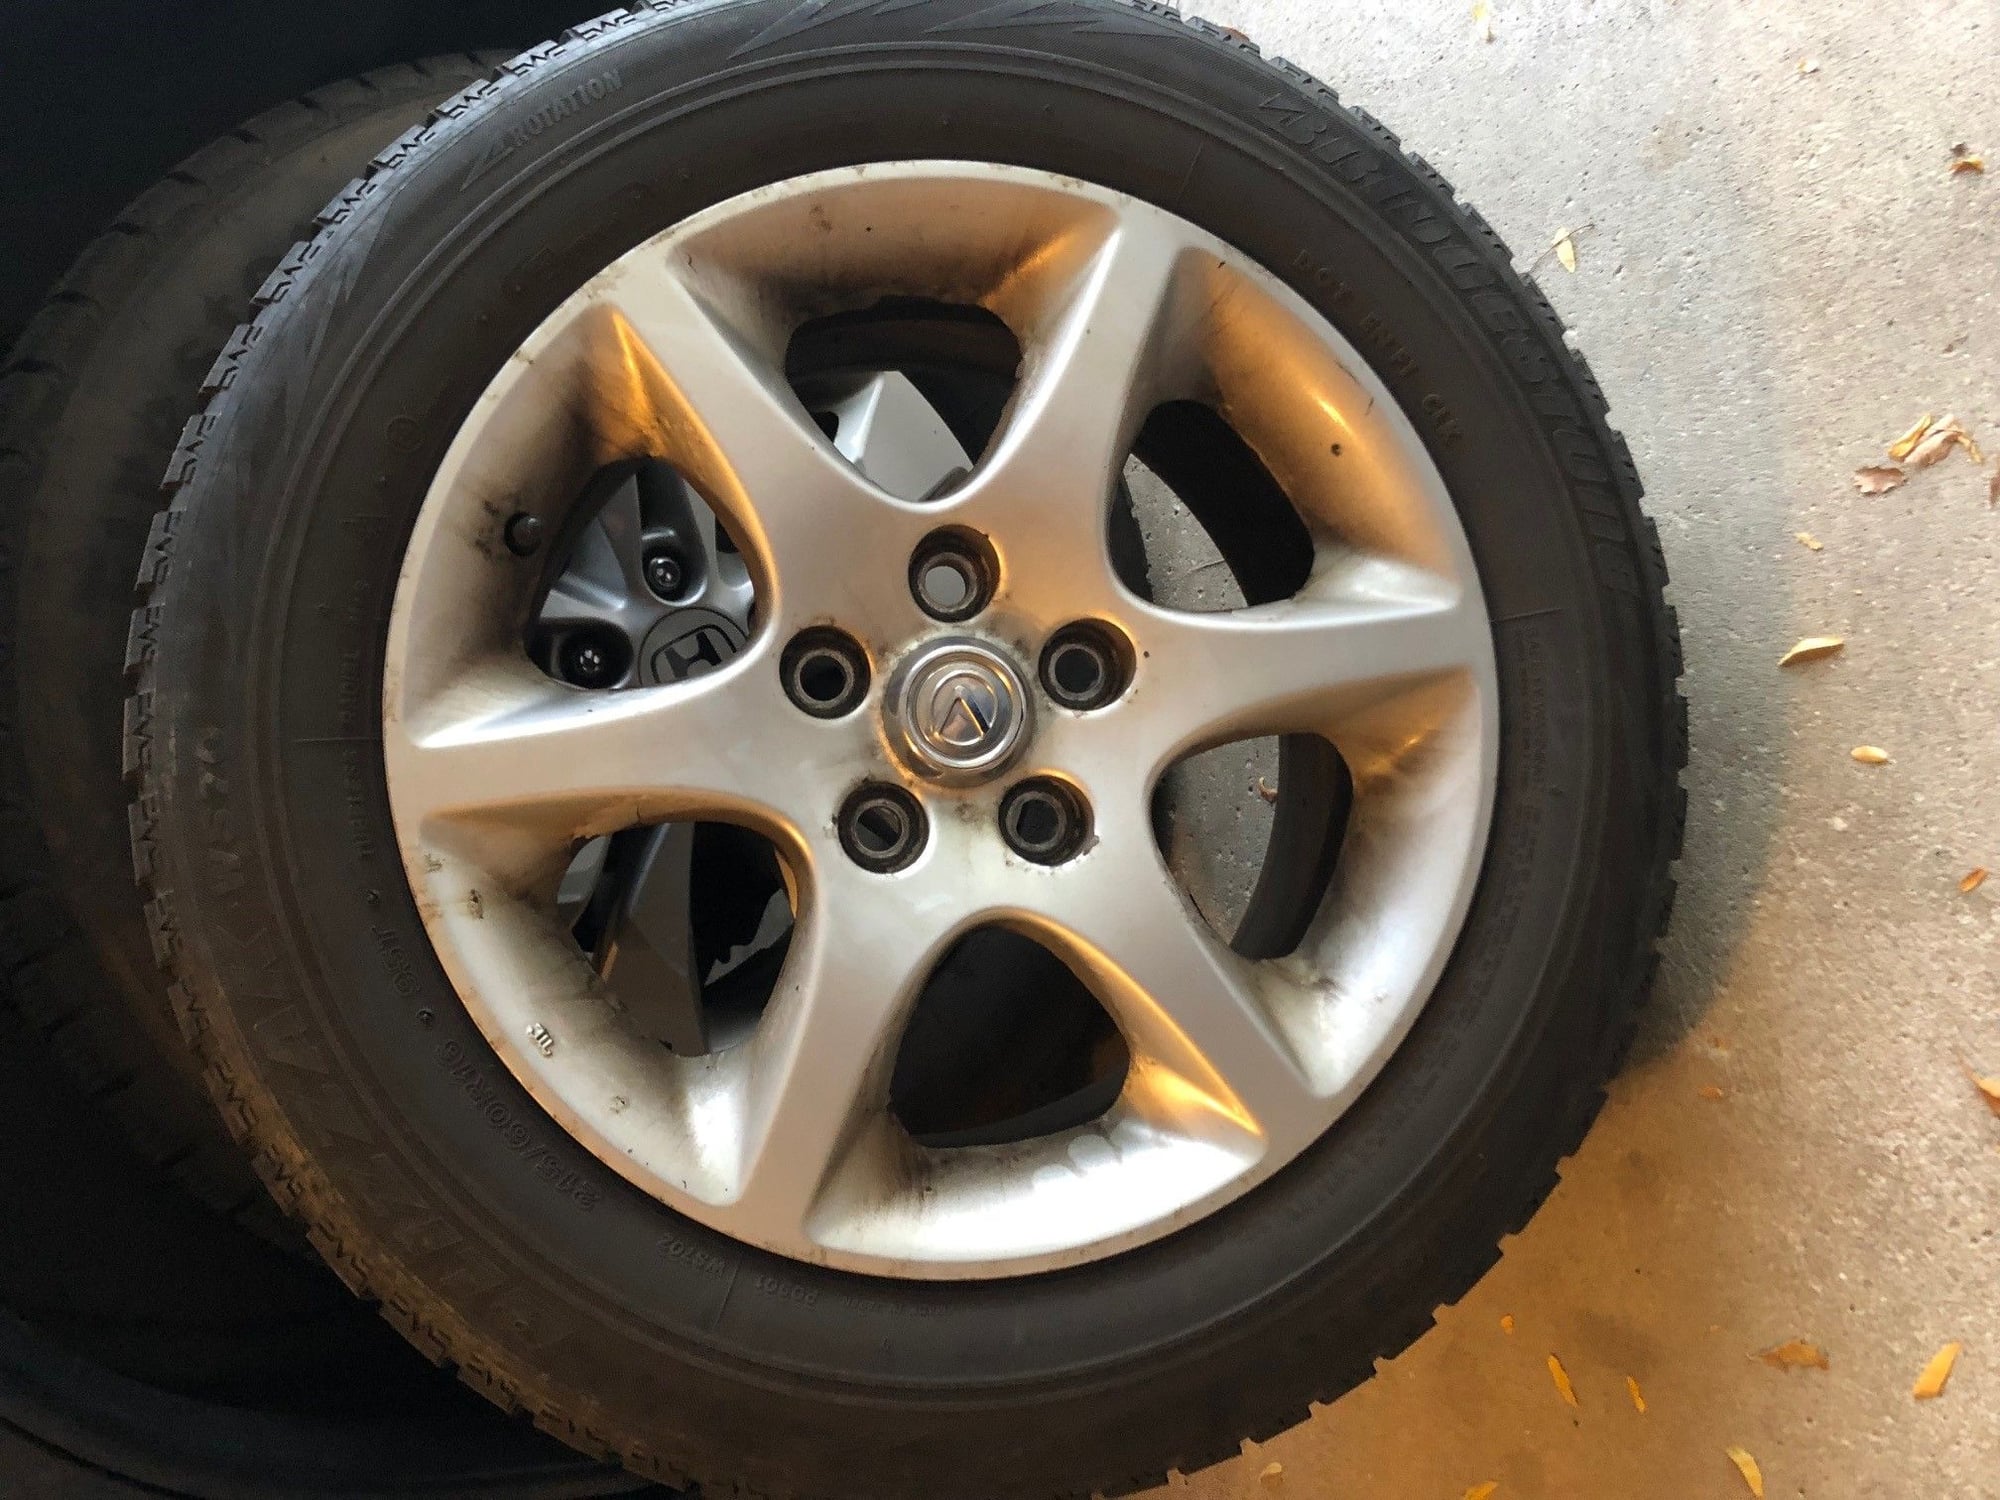 Wheels and Tires/Axles - IL 2004 Lexus GS 300 16 Inch Wheels and Blizzak Winter Tires 215/60/16 - Used - Northbrook, IL 60062, United States